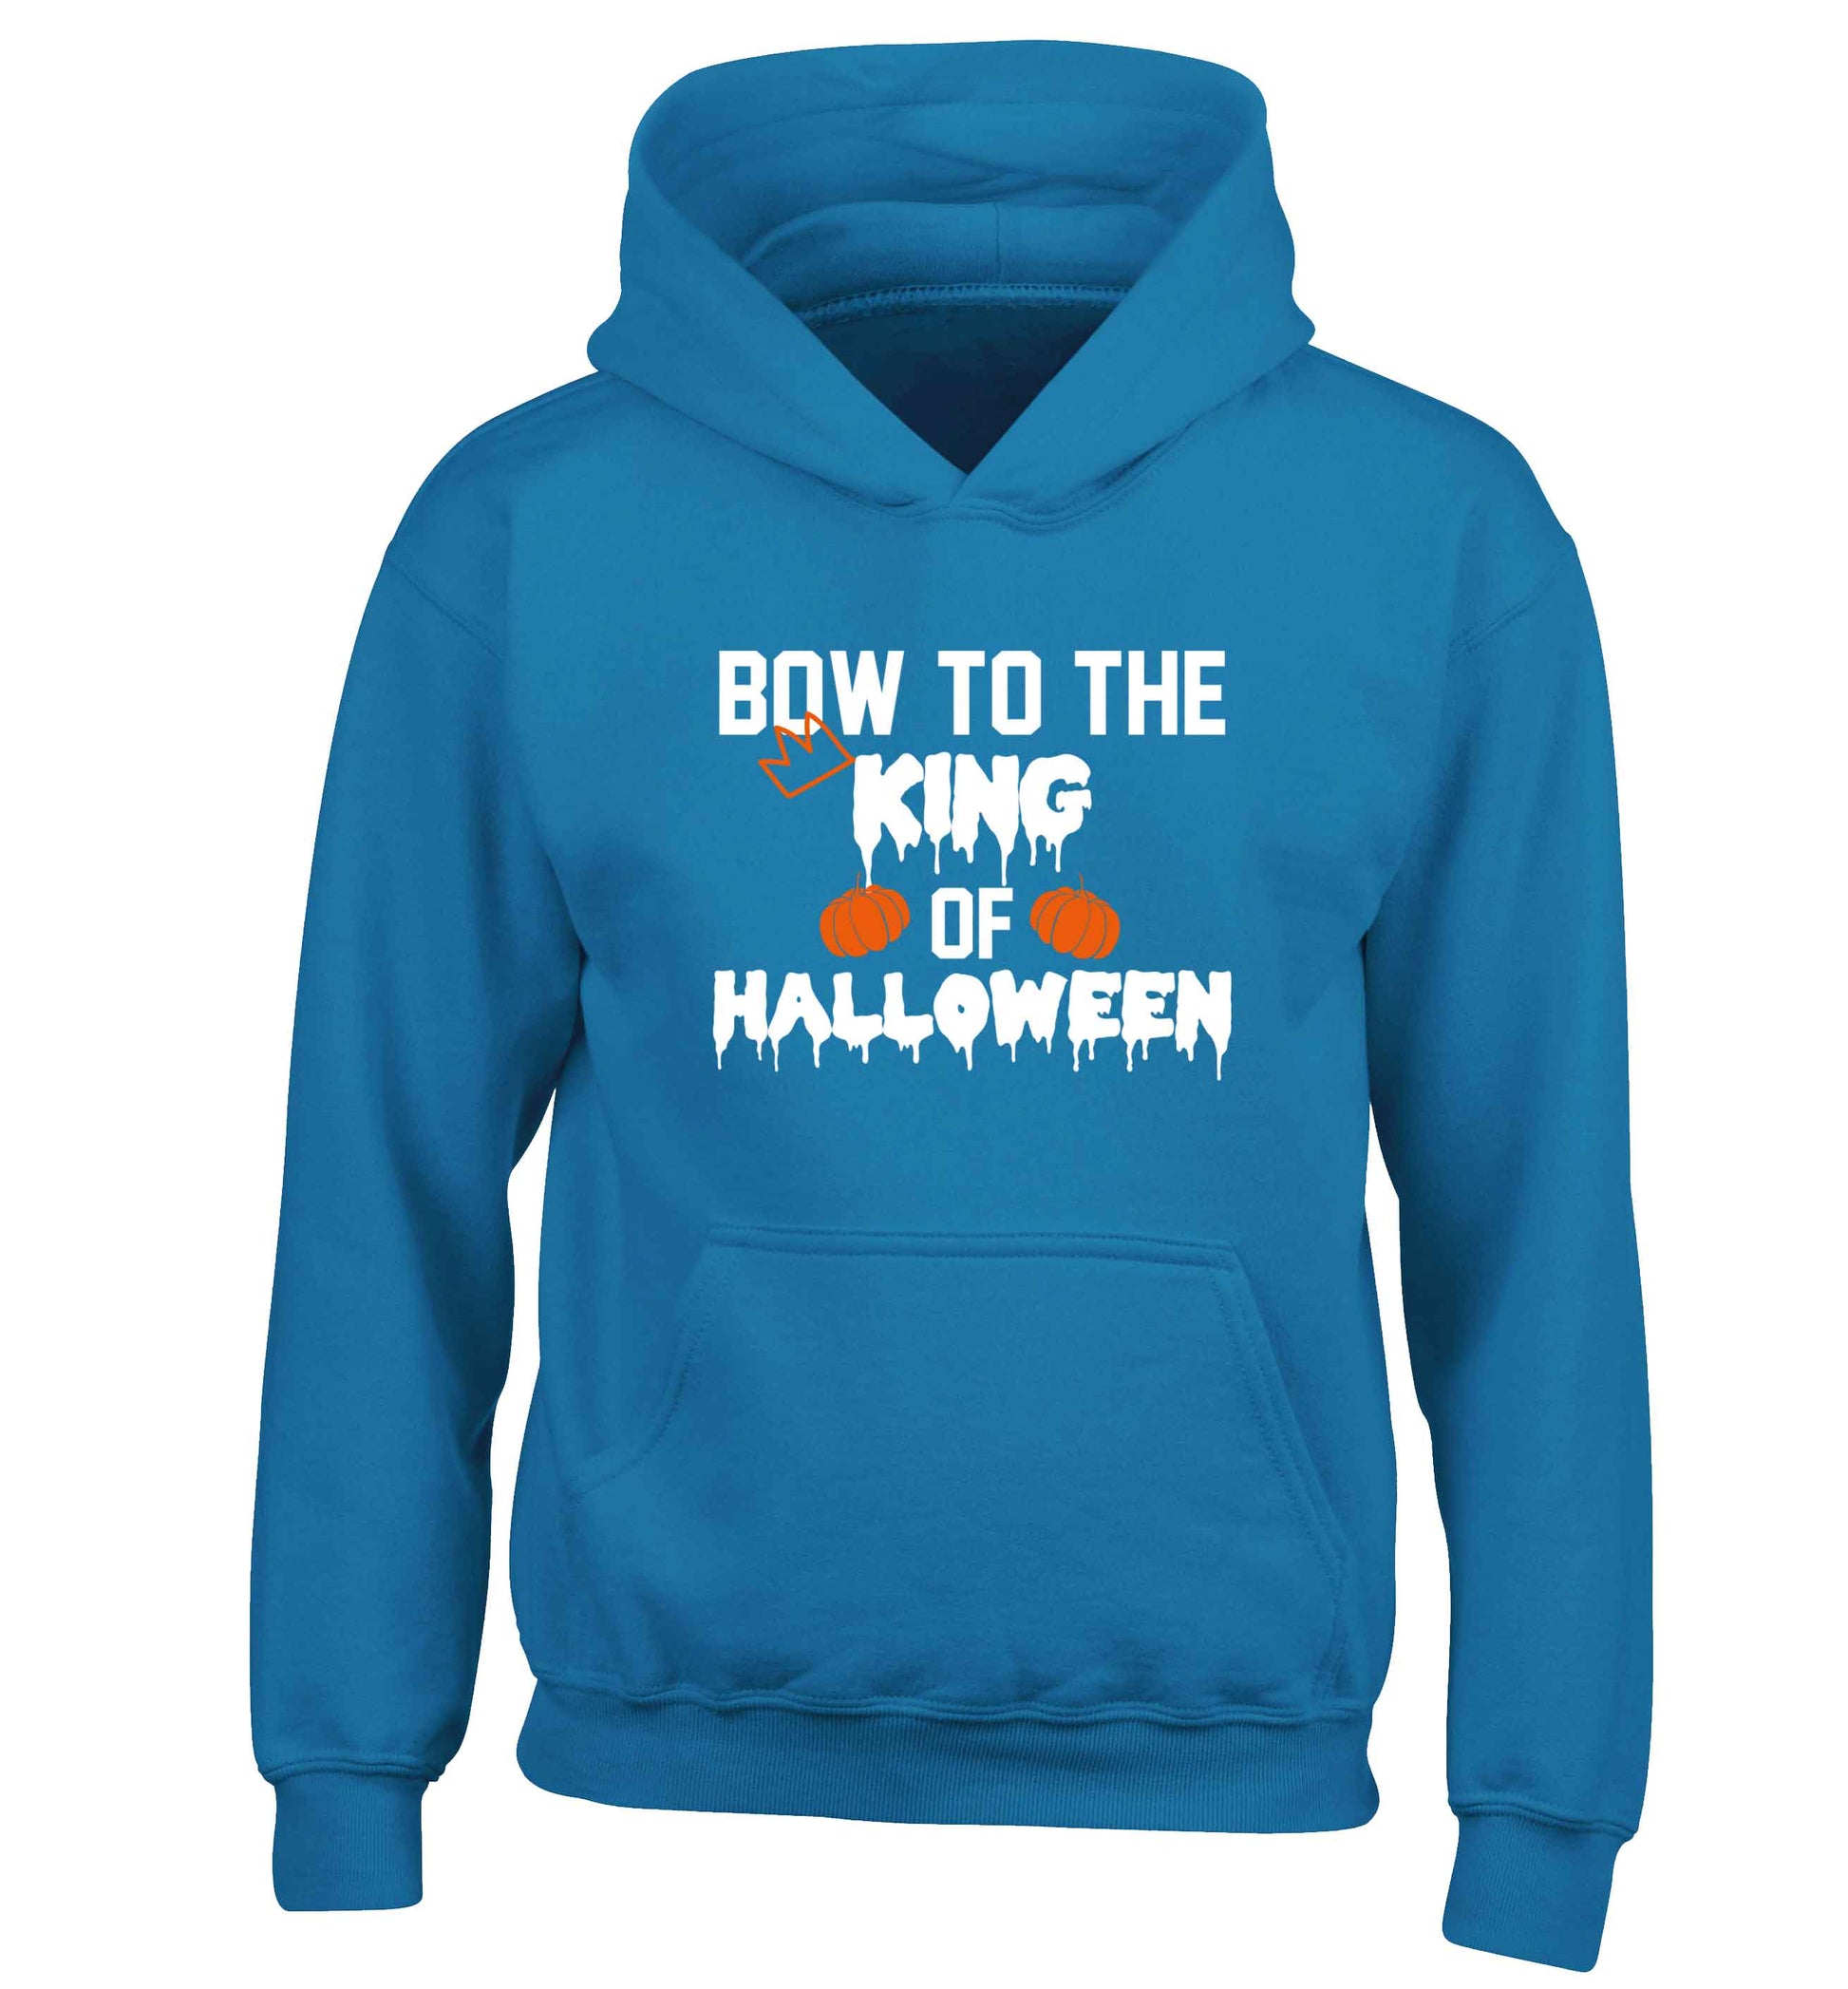 Bow to the King of halloween children's blue hoodie 12-13 Years